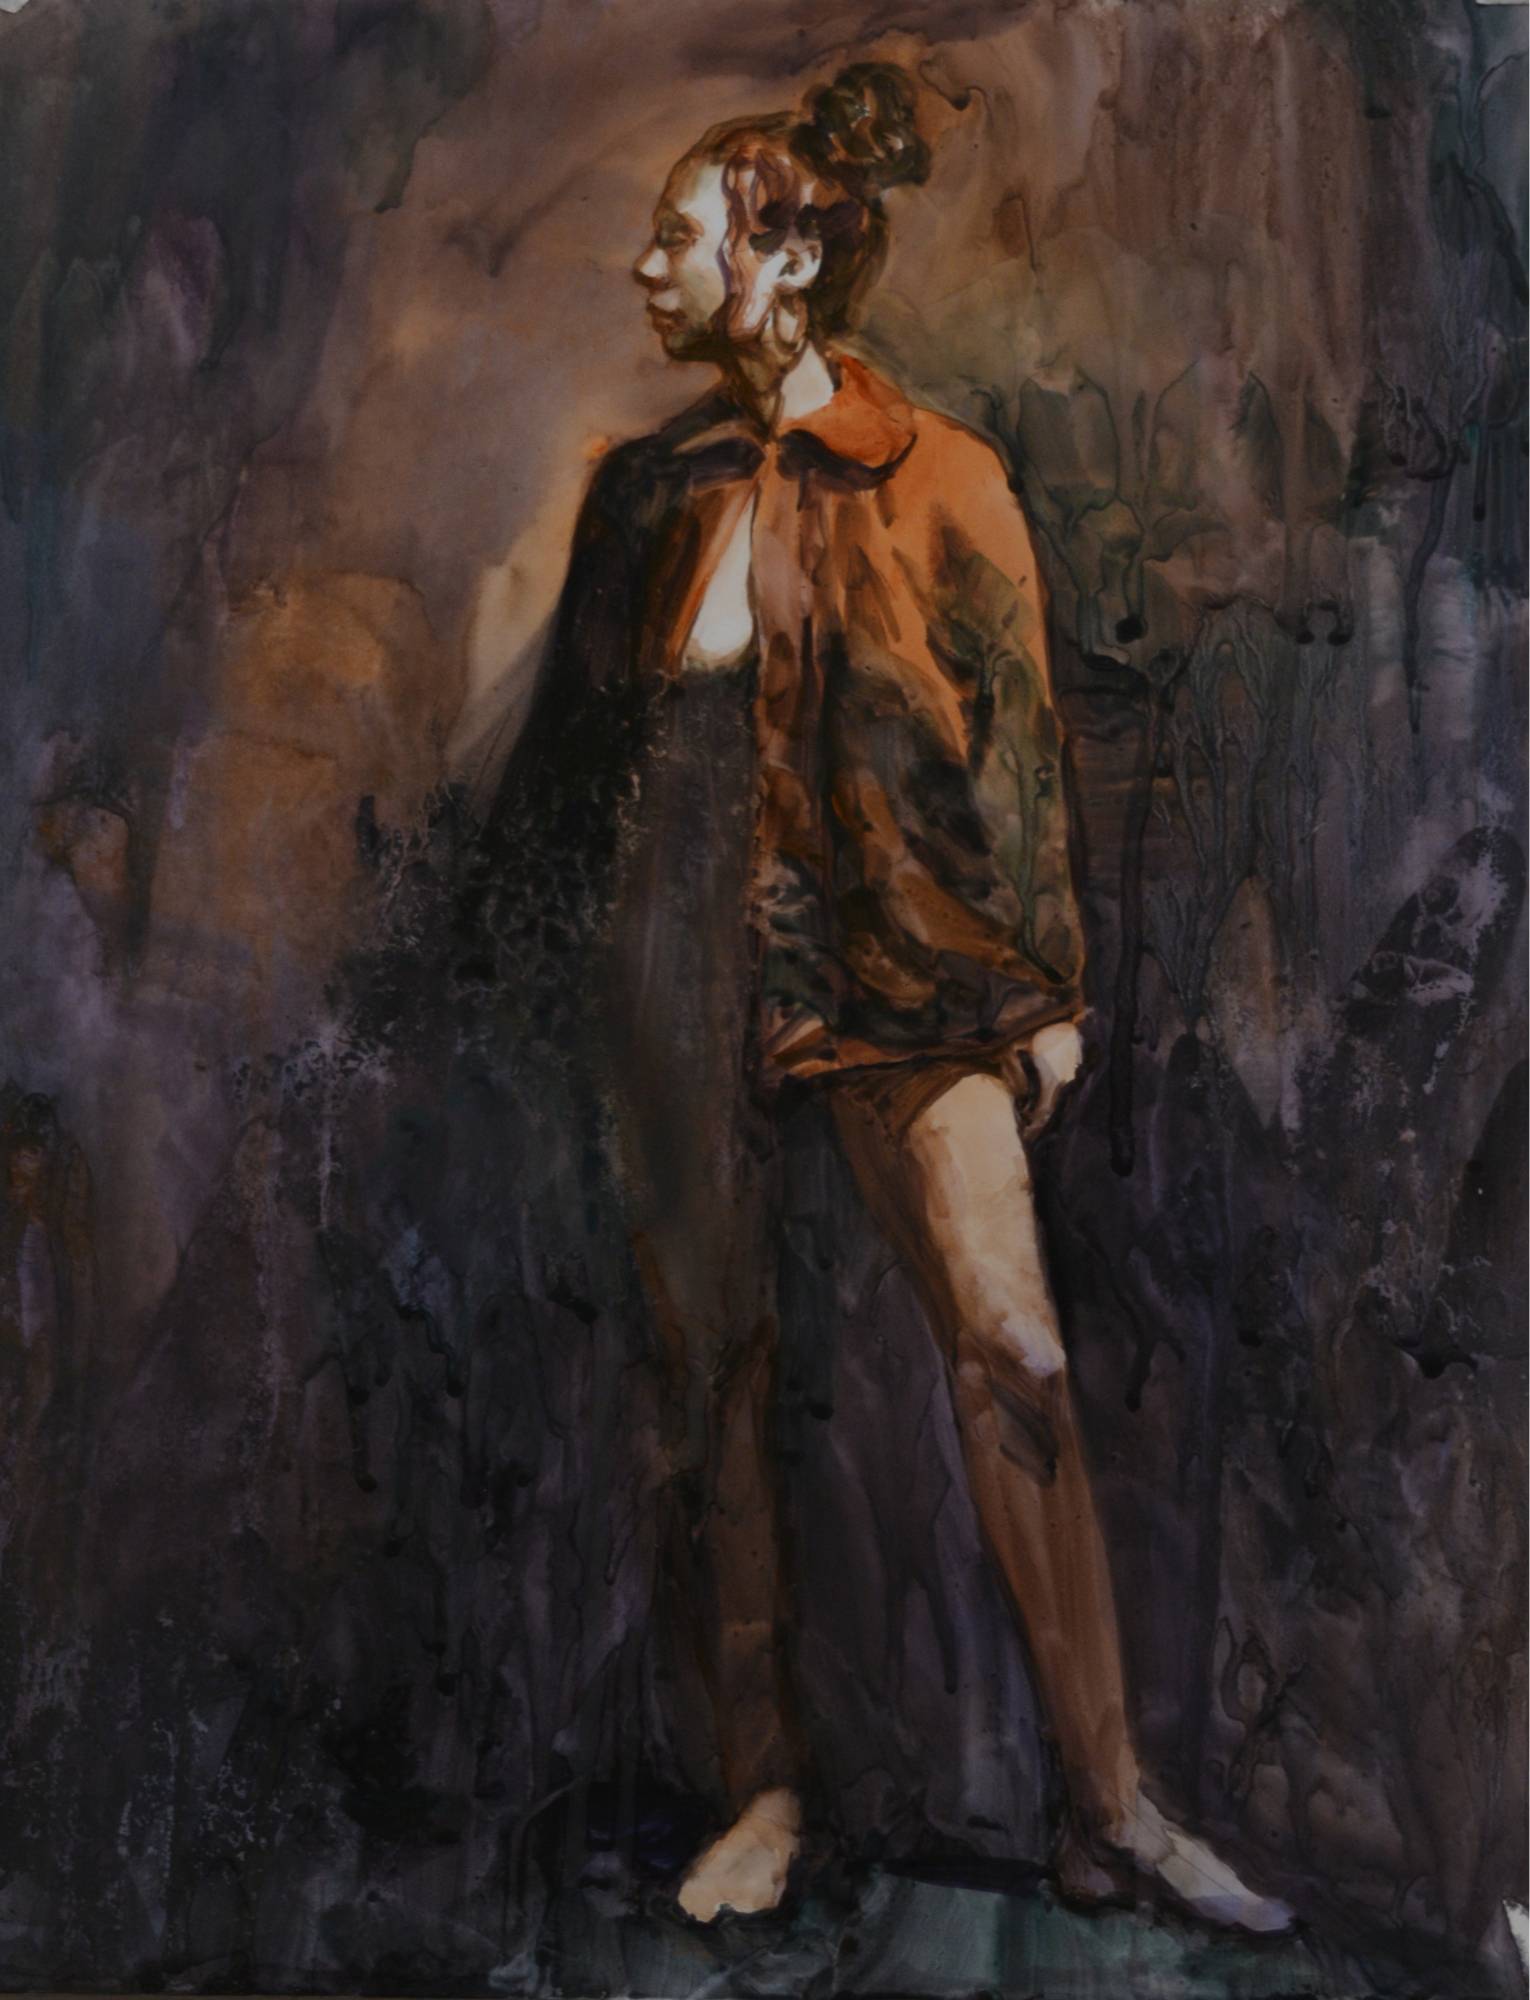 watercolor of a standing female figure wearing a collared cloak against an abstract background, head in profile looking to our left